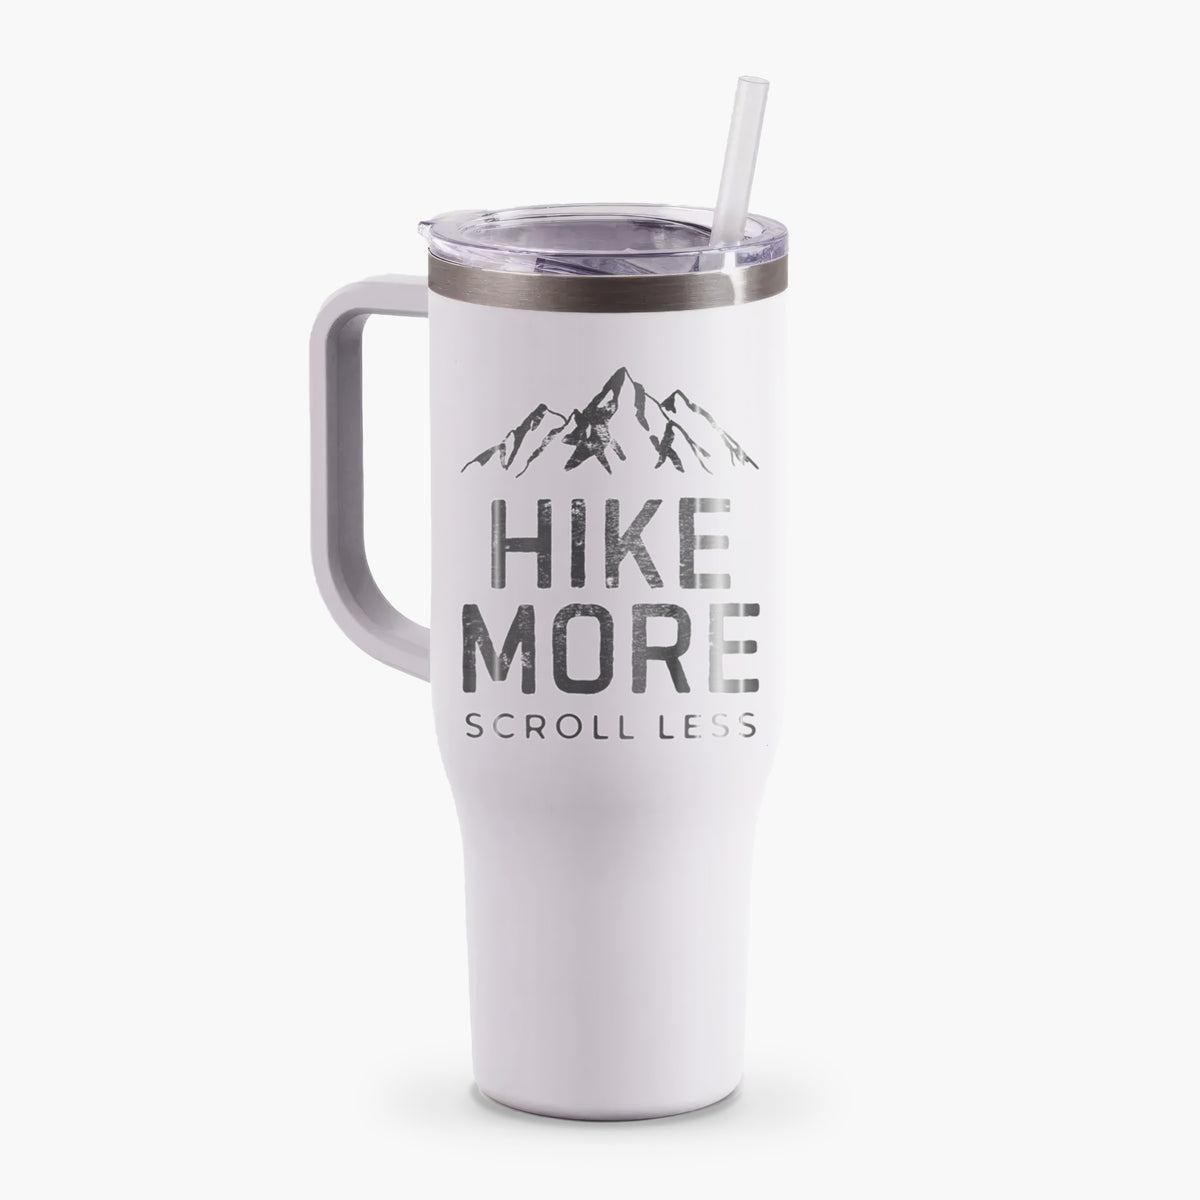 Hike More - Scroll Less - 40oz Tumbler with Handle